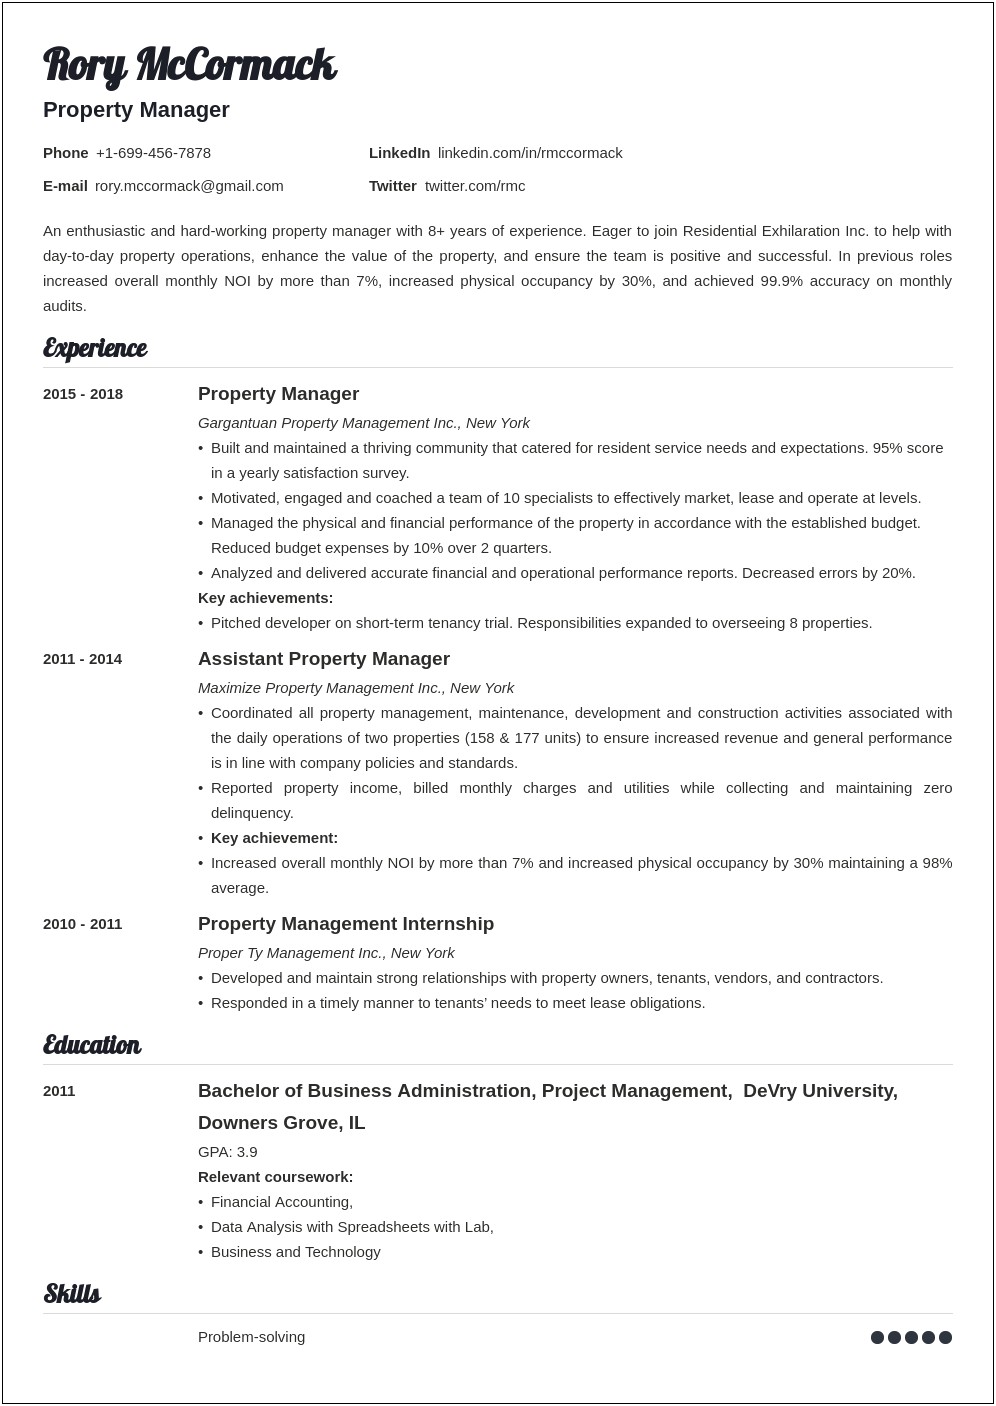 Hybrid Resume Example For Property Manager No Experience